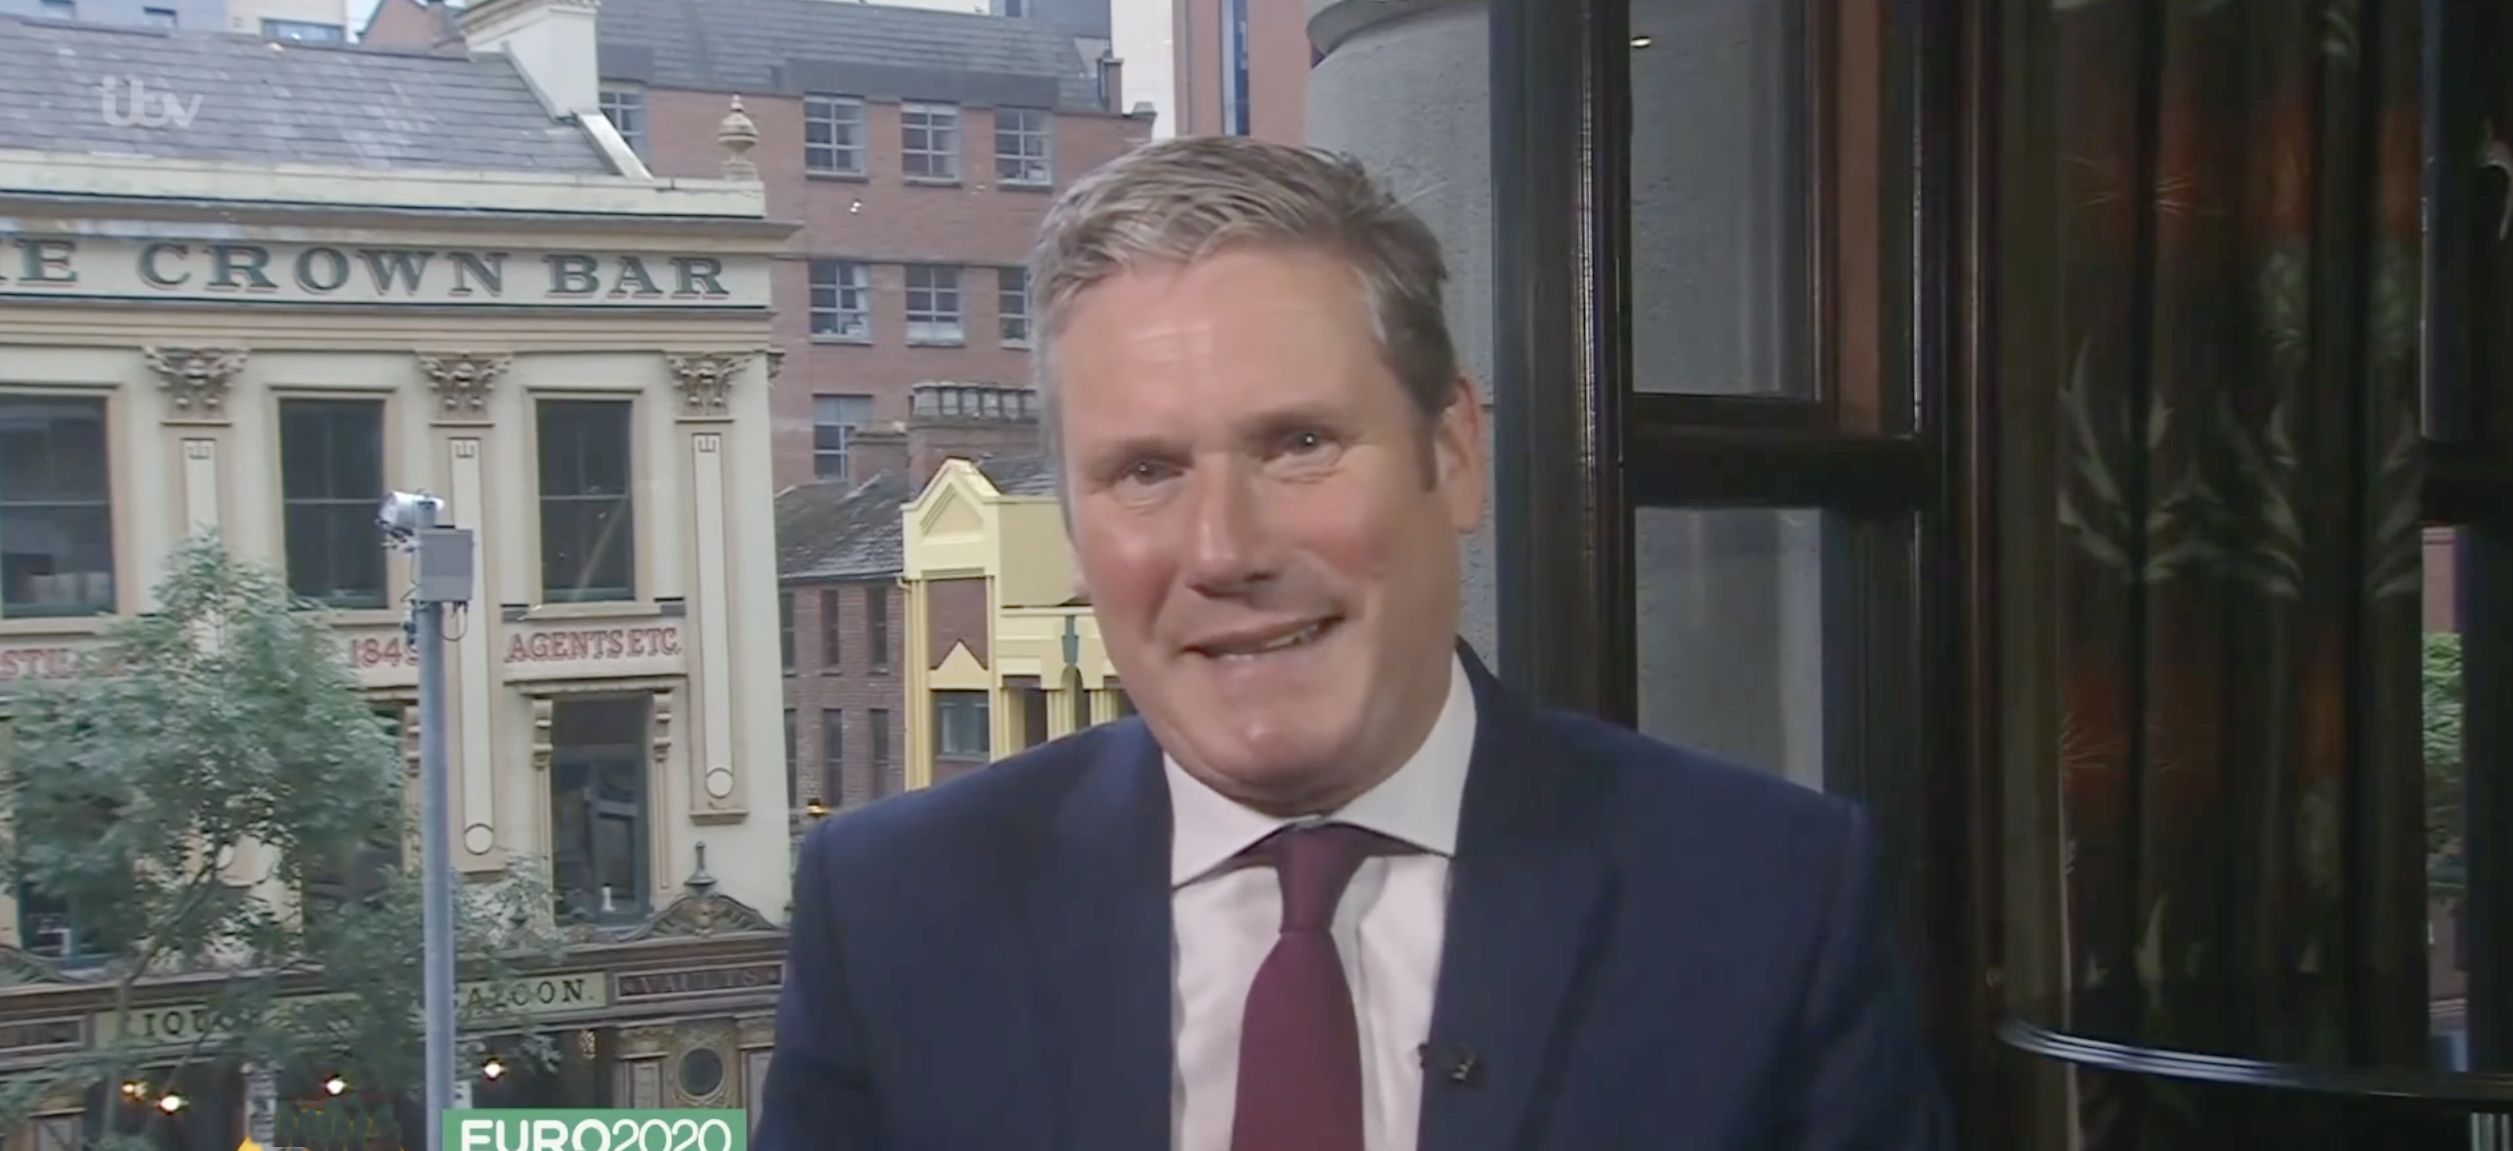 CONSTROVERSIAL REMARKS: Keir Starmer on his visit to Belfast